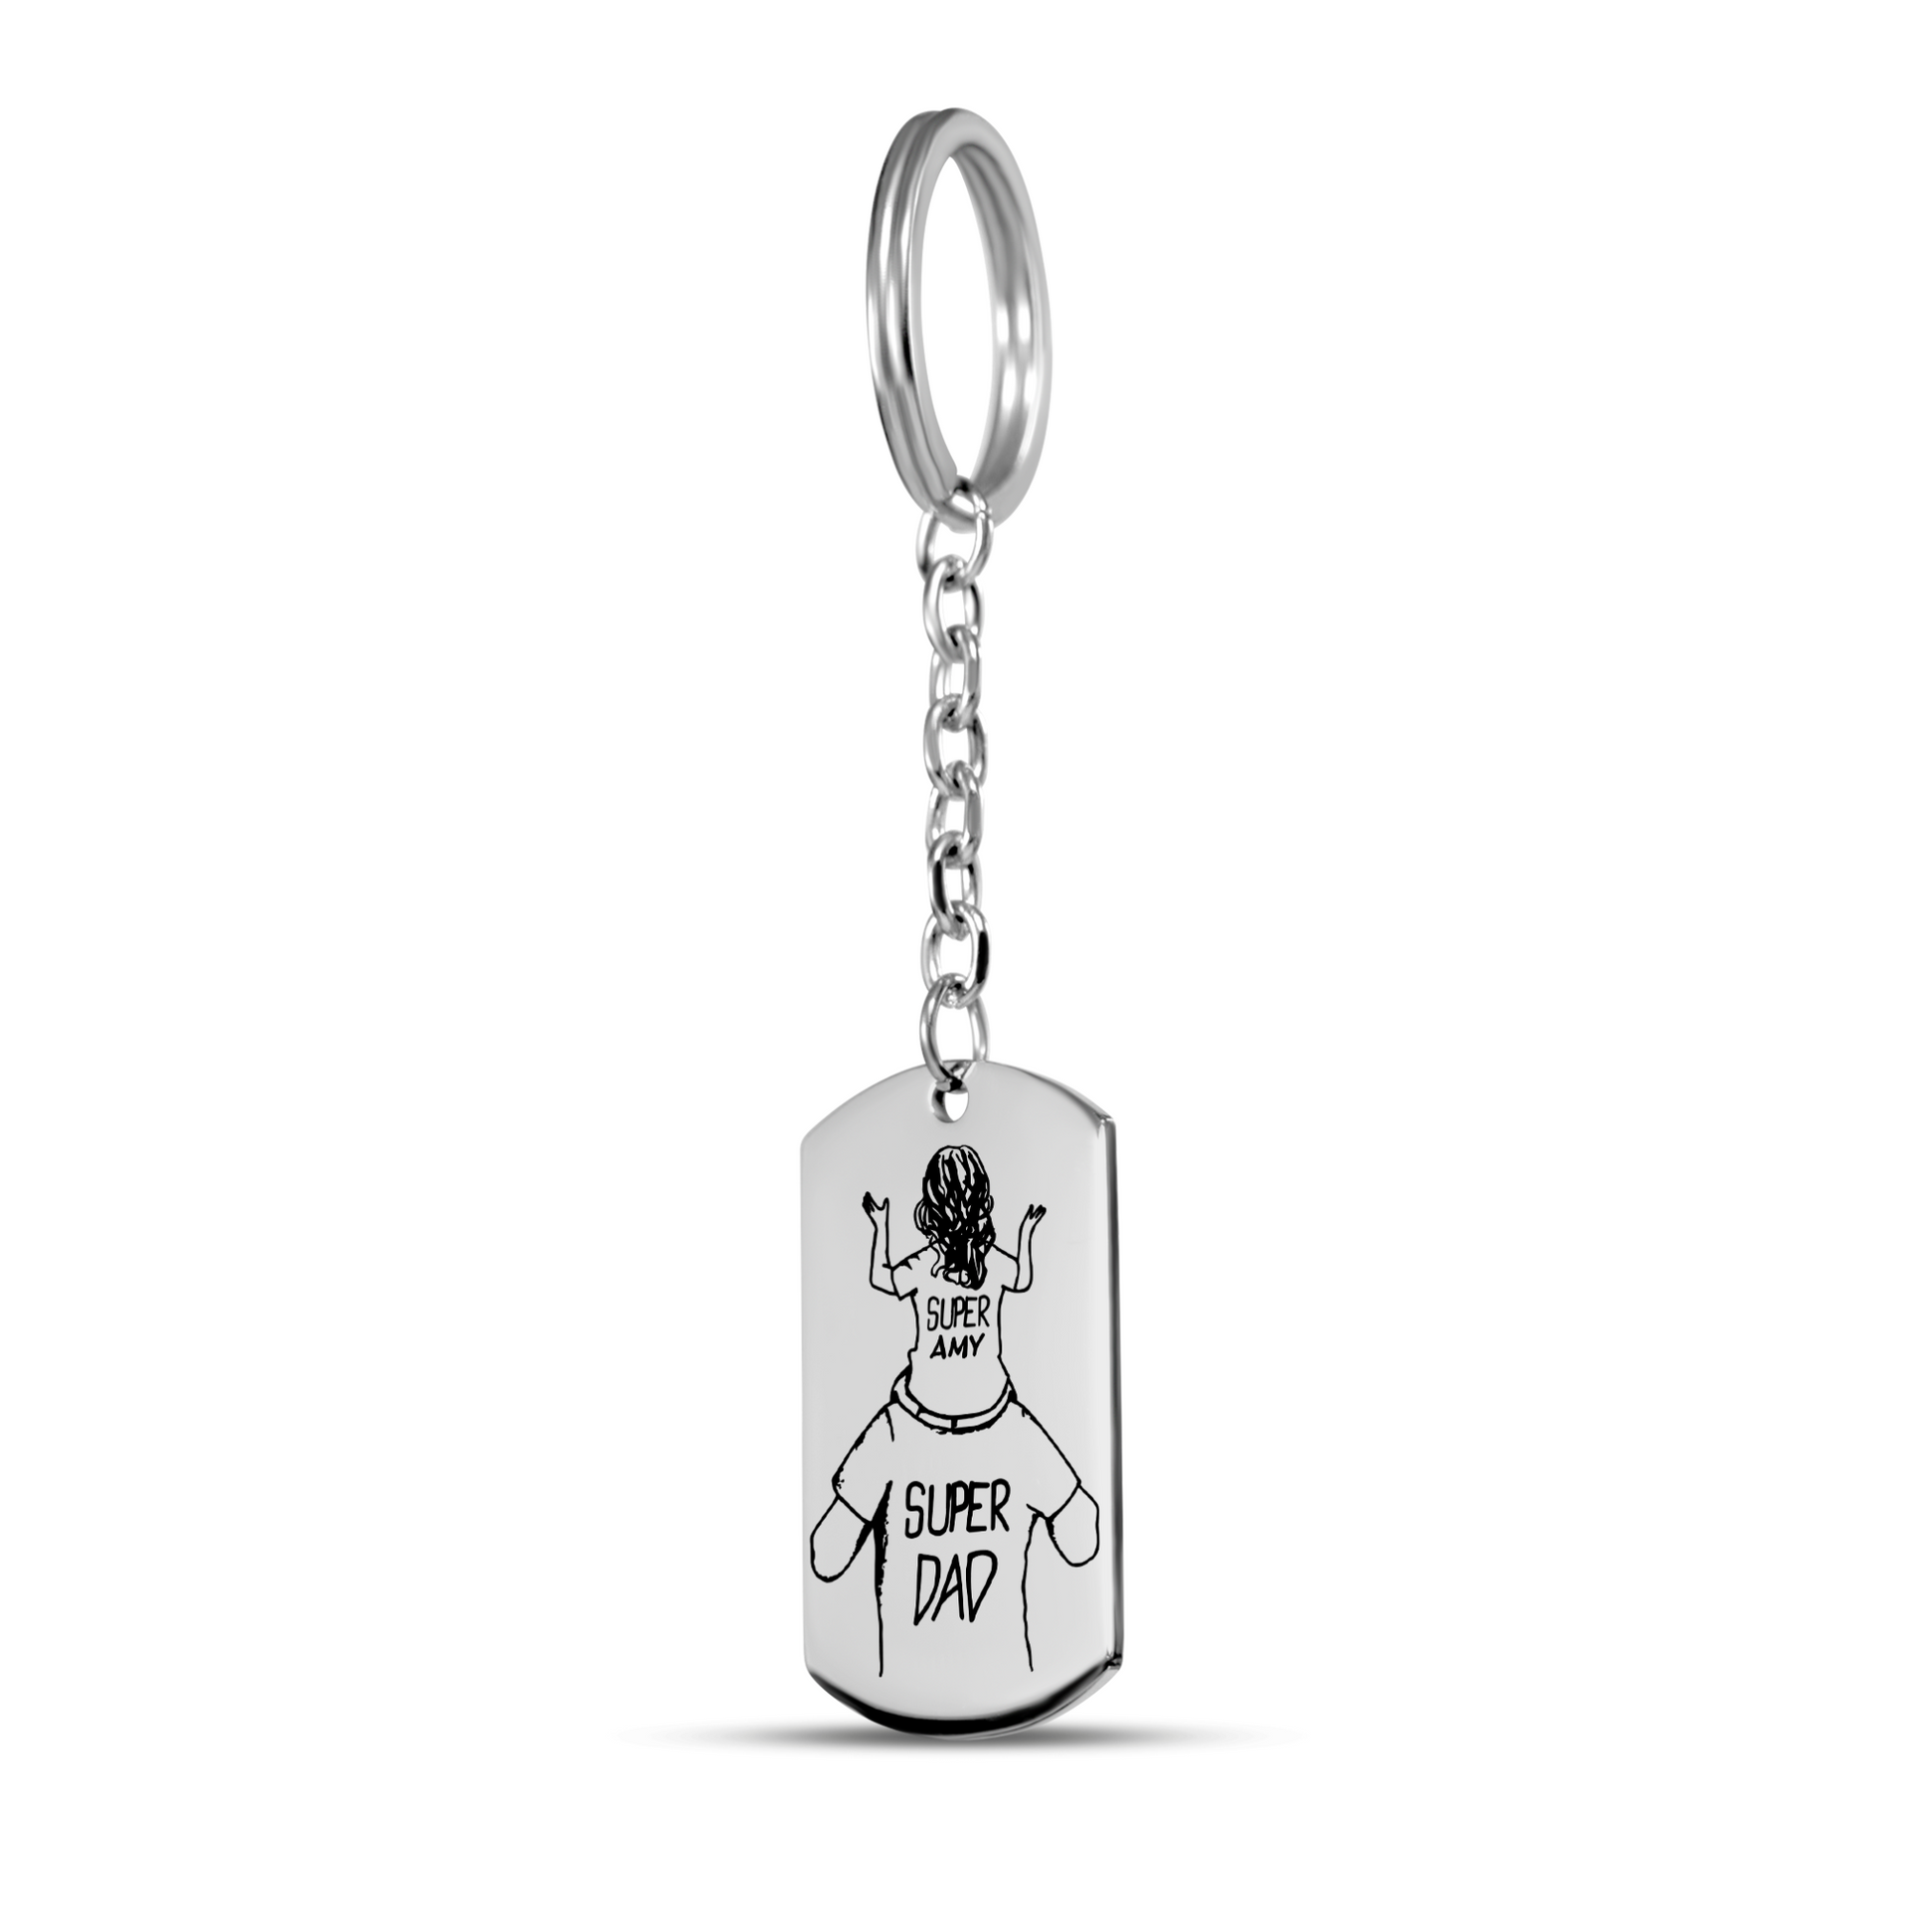 Personalized Keyrings - Personalized Super Father-Daughter Keychain 